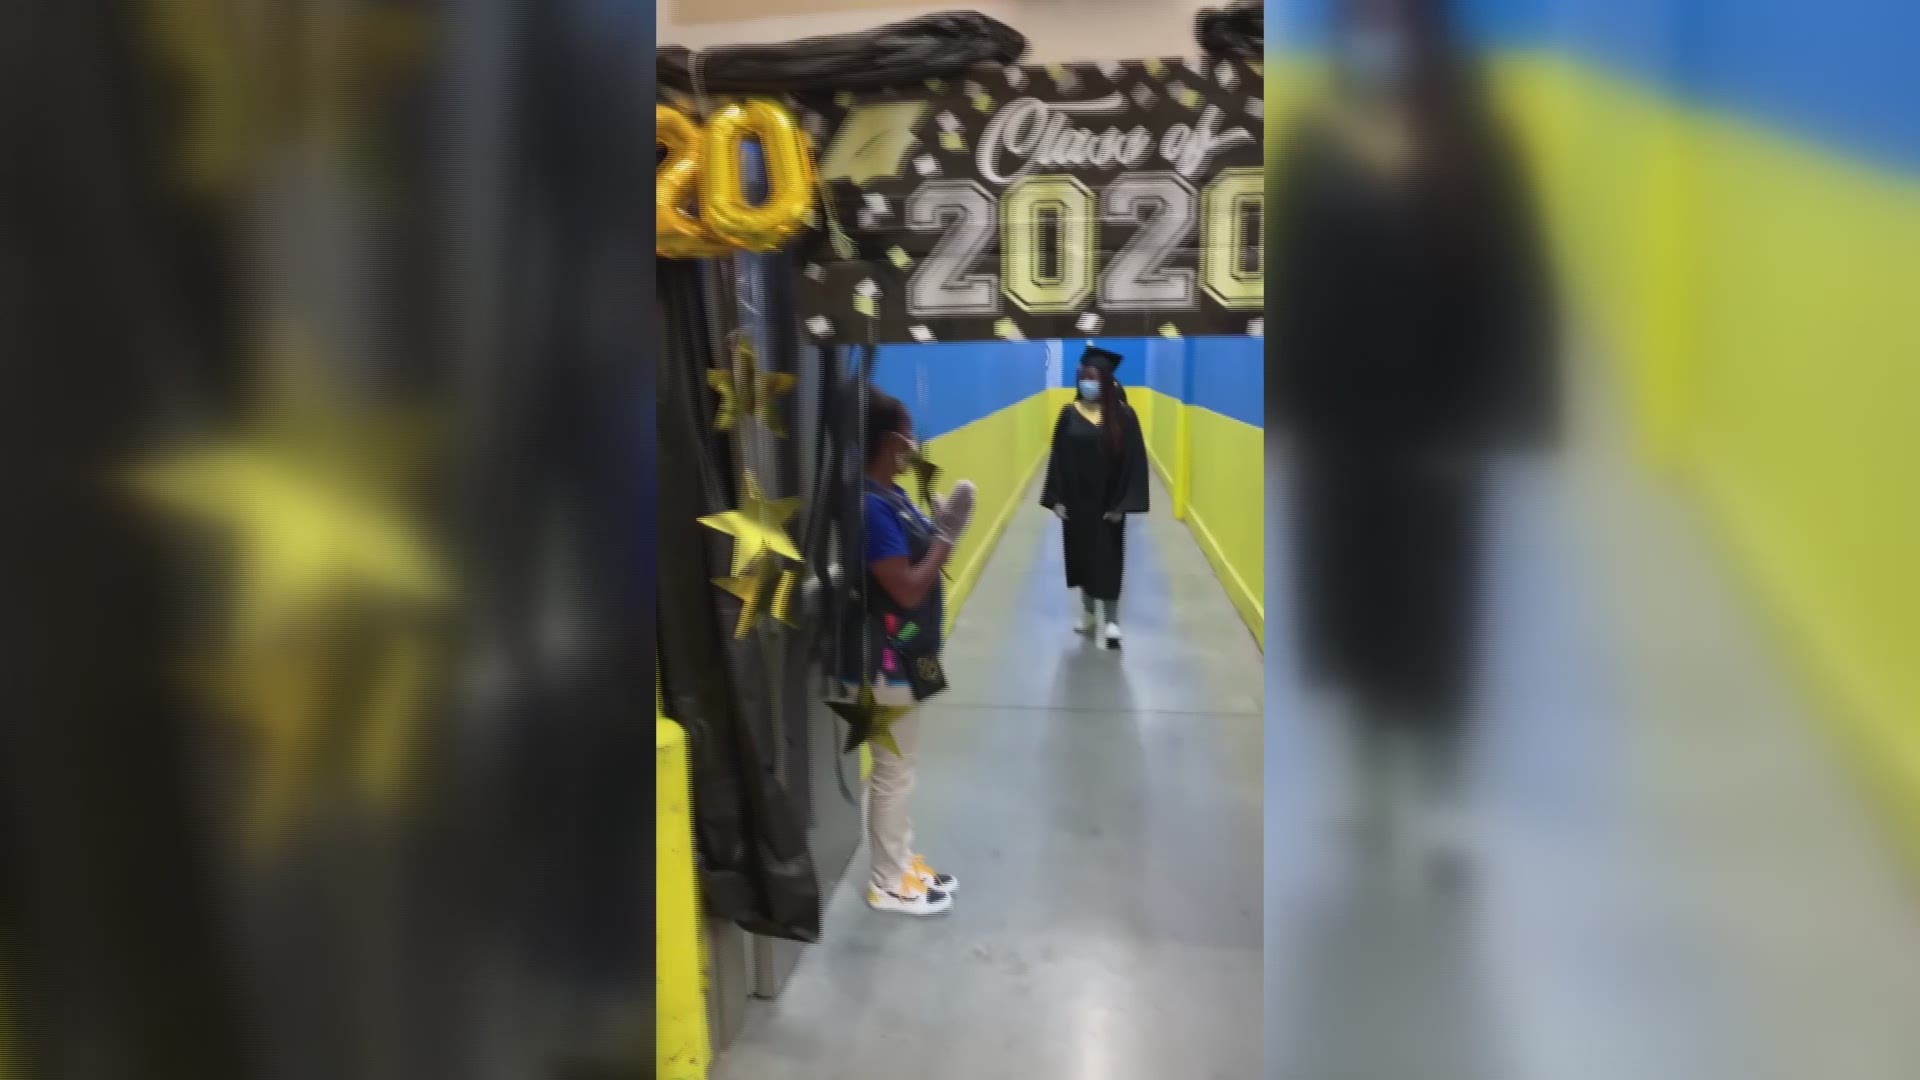 The Dublin Walmart honored it's employees who graduated high school with a special in-store celebration.